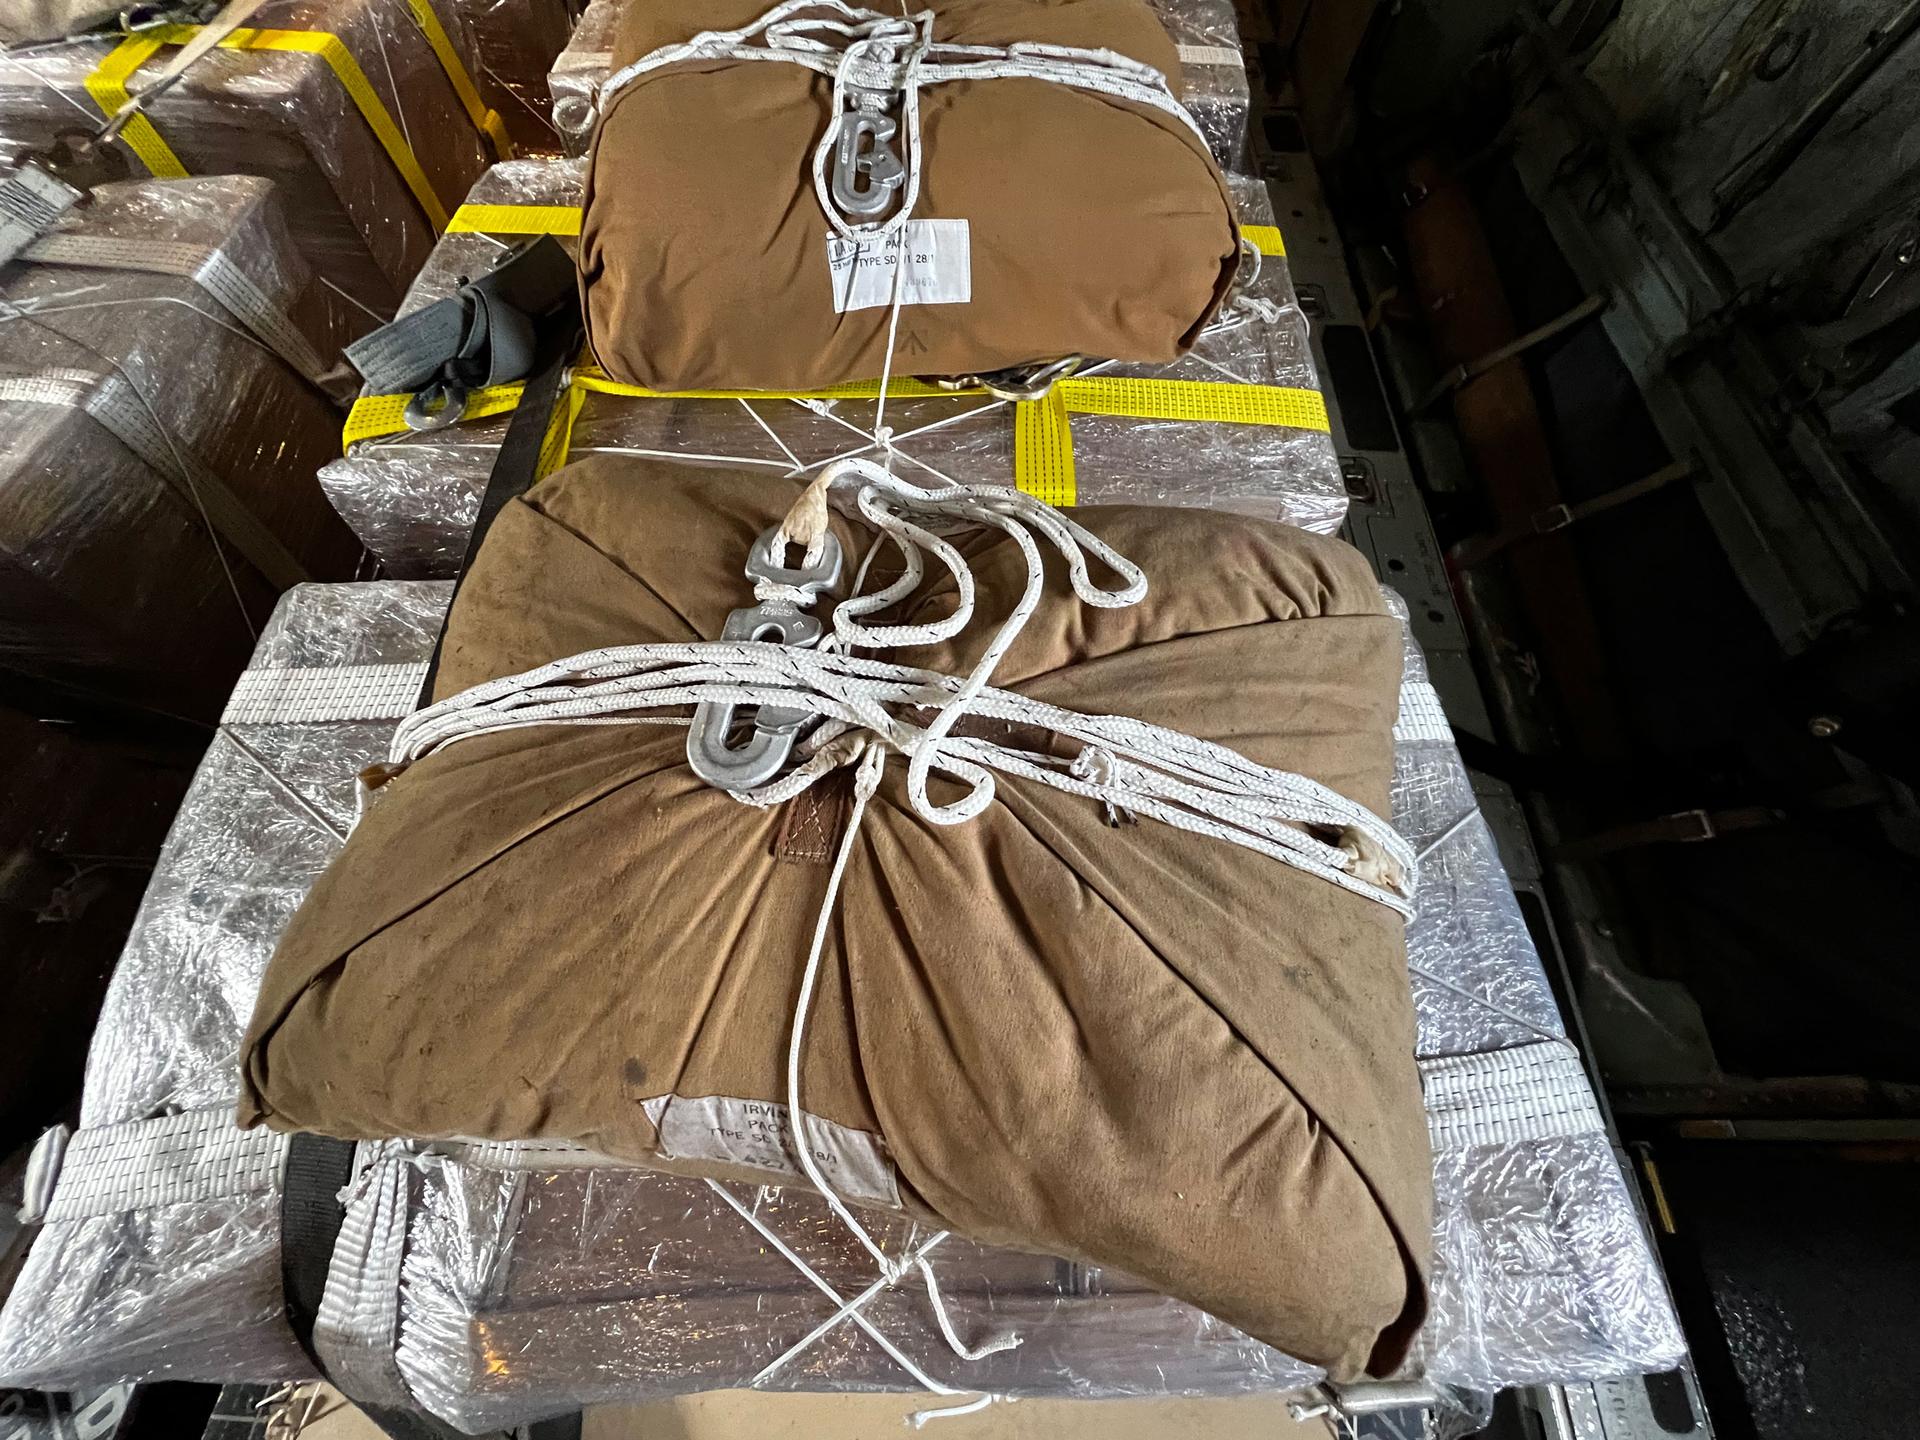 Each pallet of aid is fitted with a parachute which opens as they are dropped.